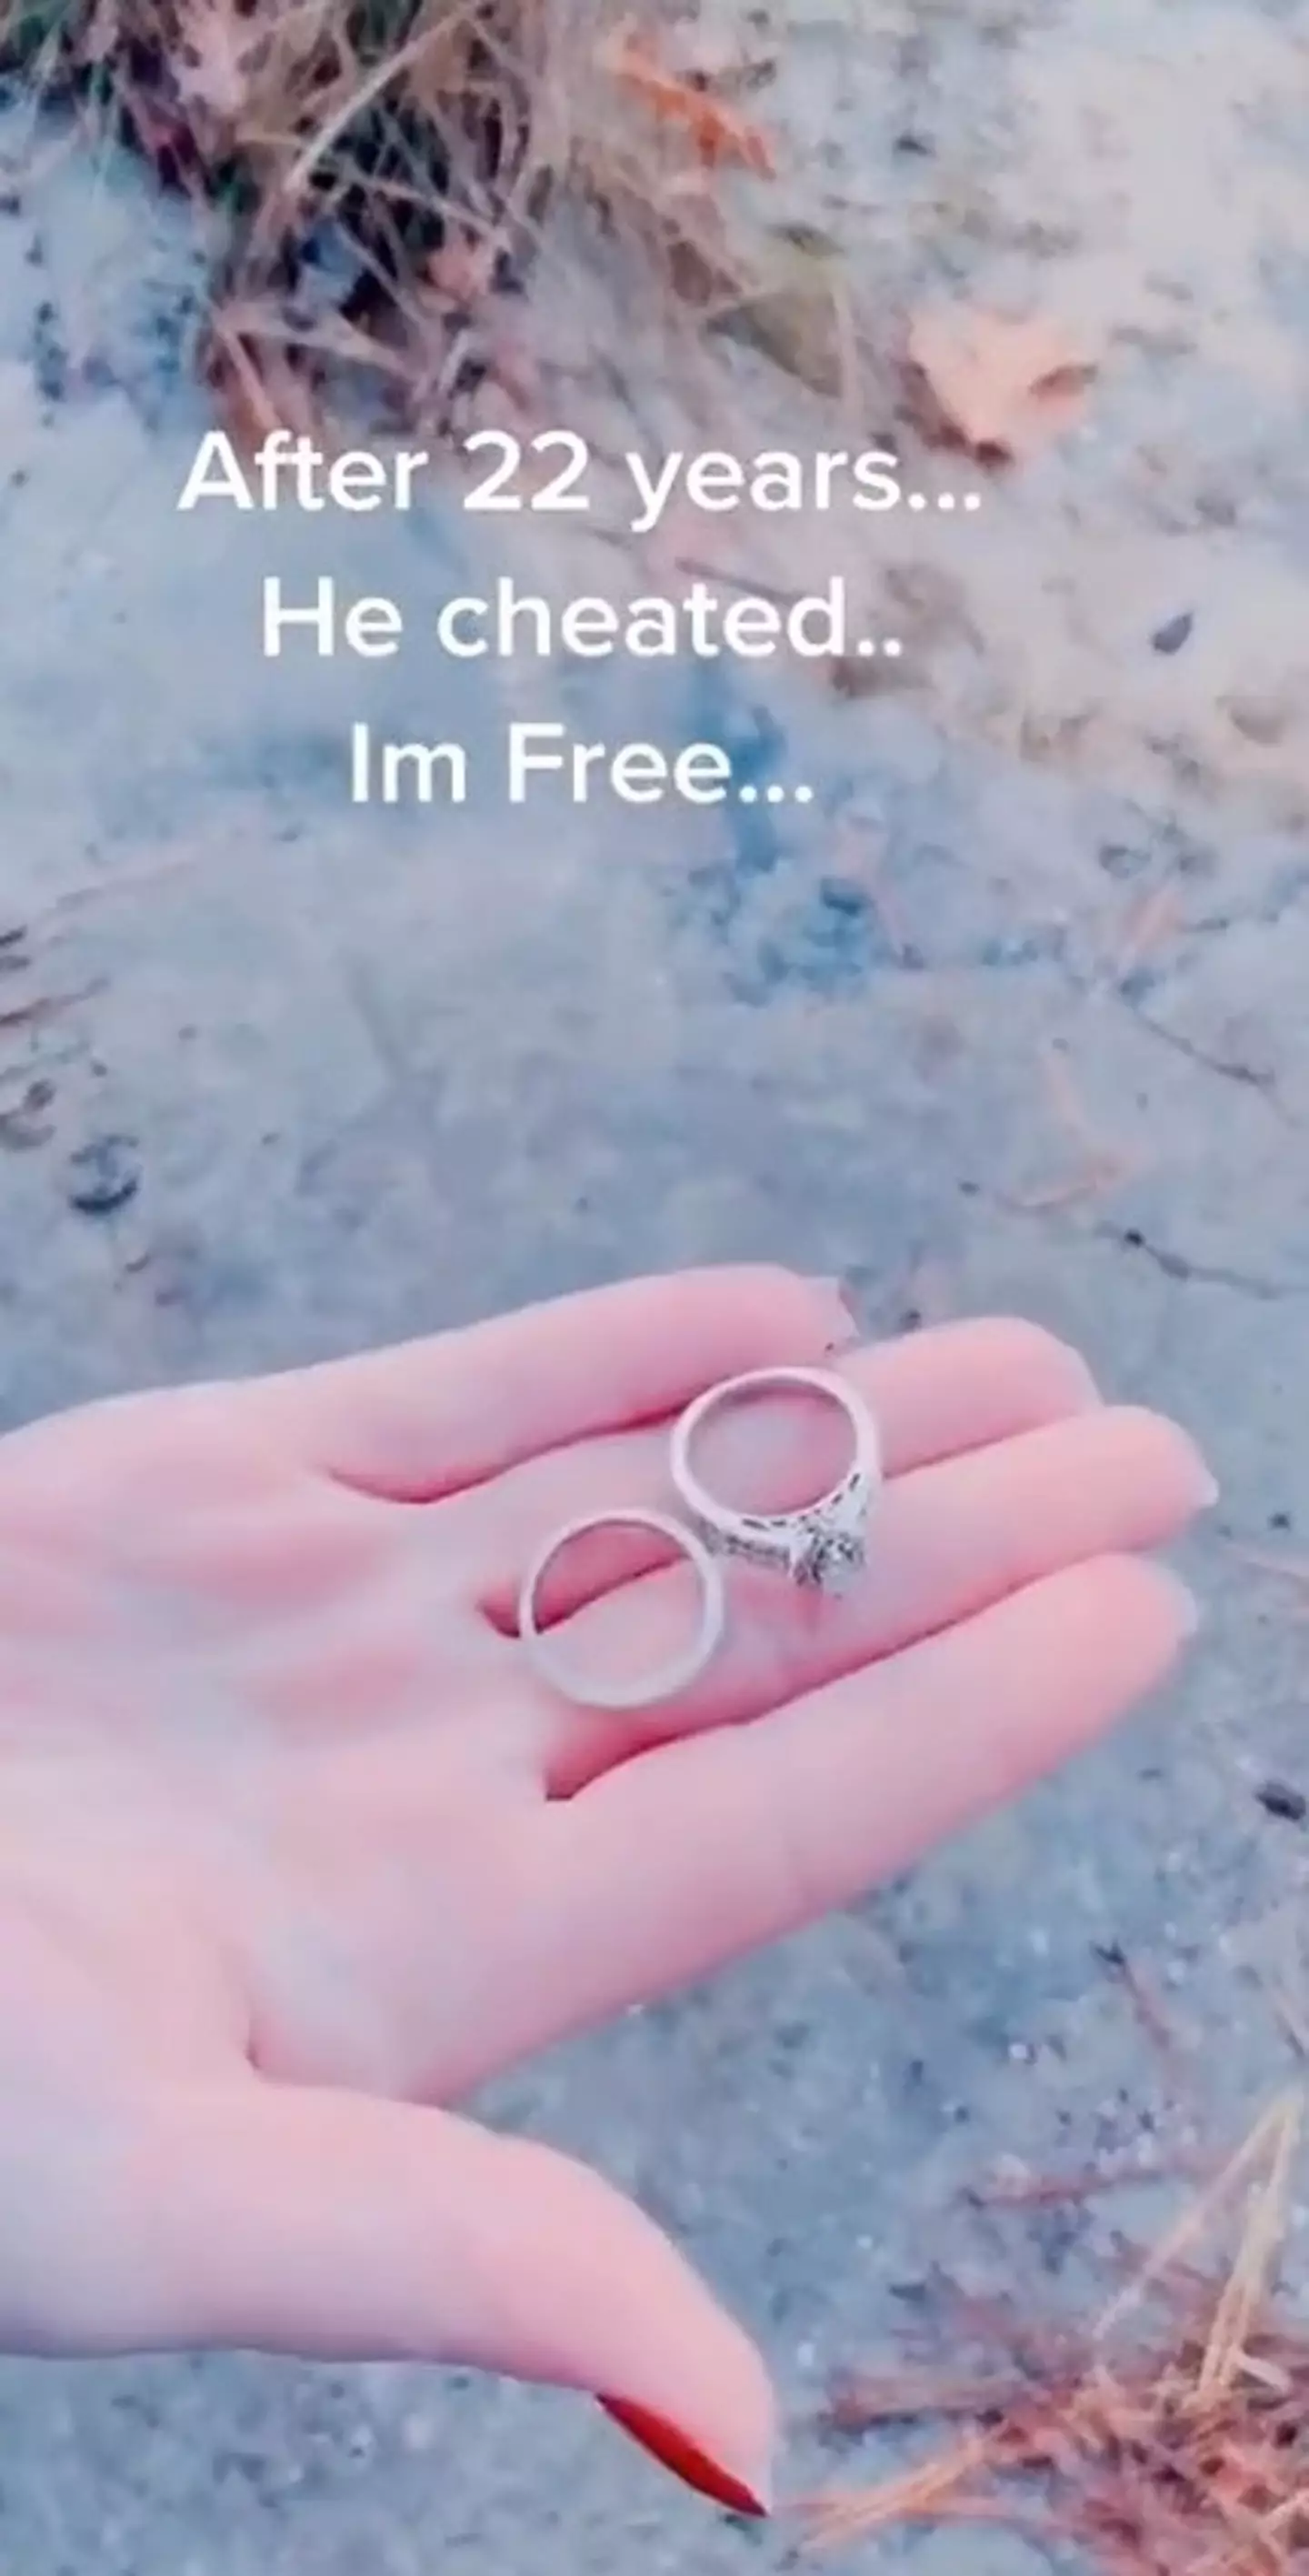 It all started when a woman went viral in 2020 for throwing her husband's engagement ring into the river after finding out he was cheating.